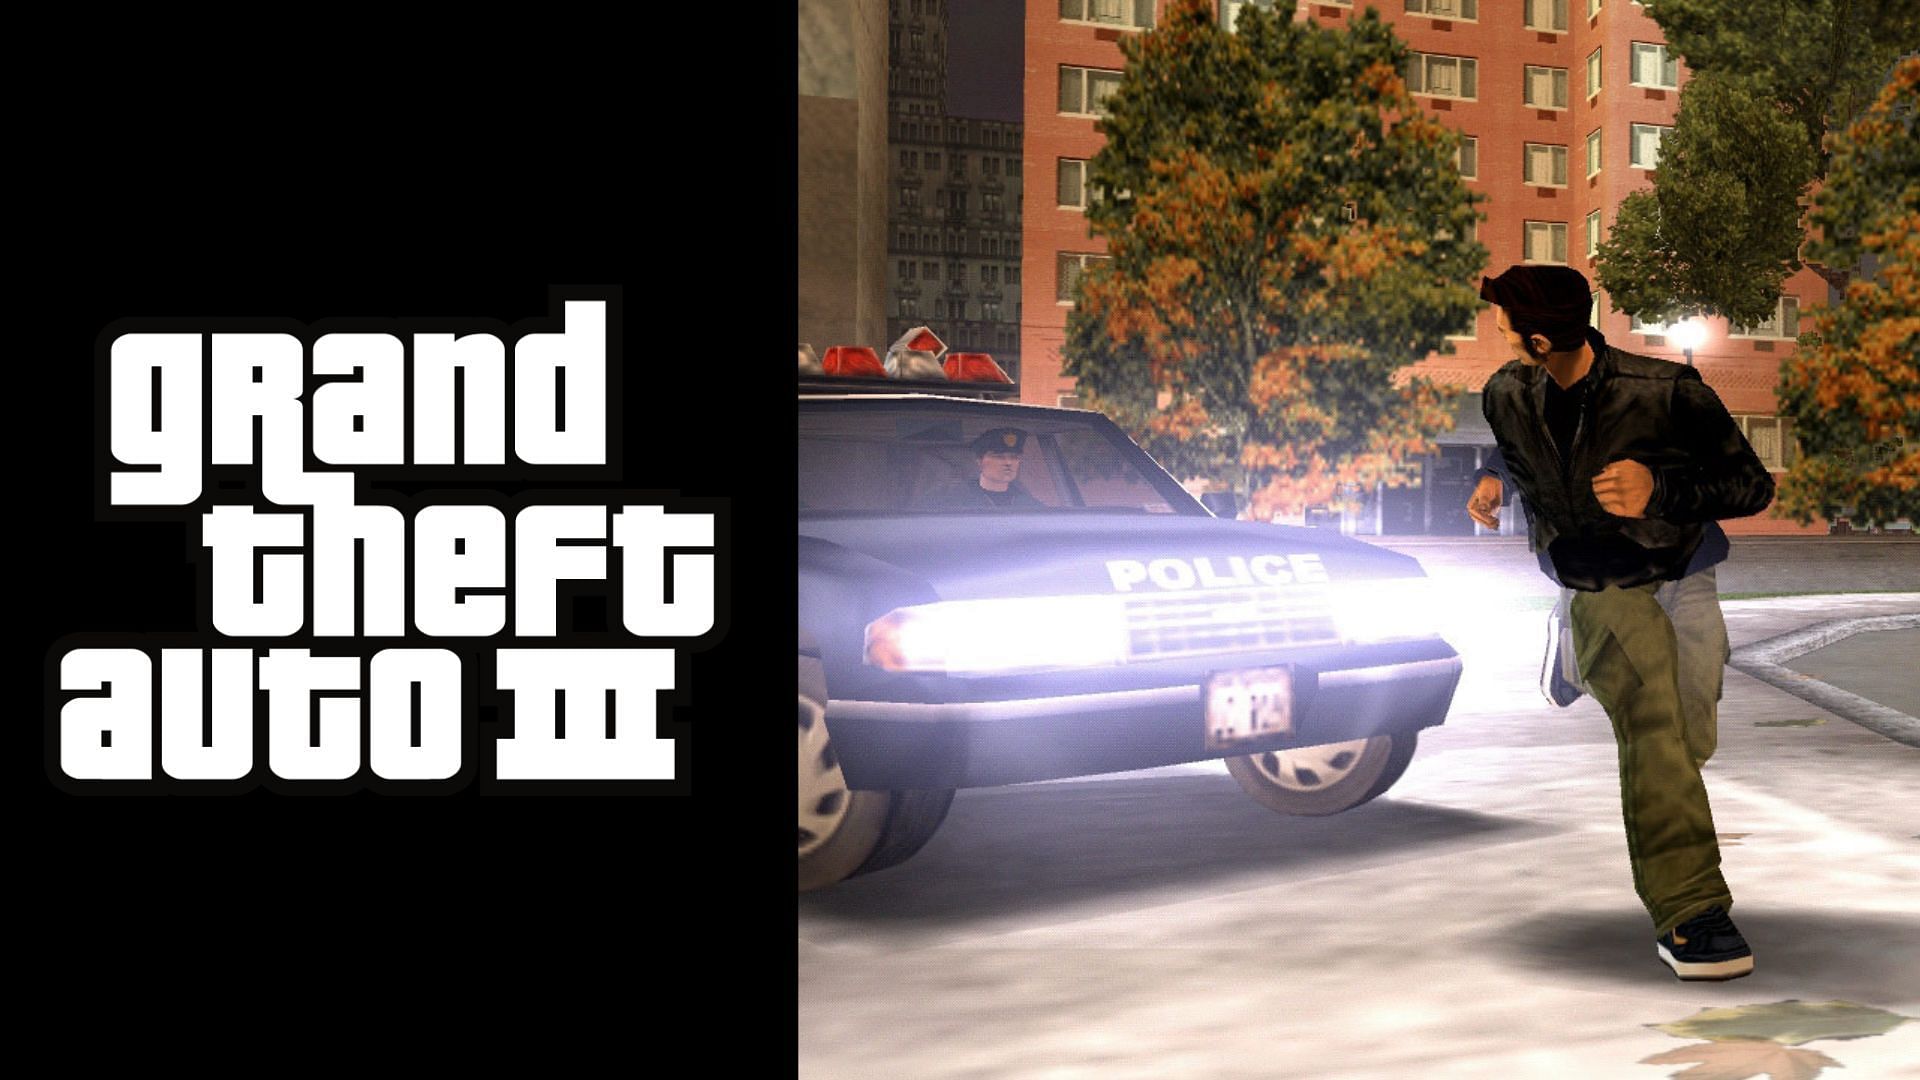 major things GTA 3 introduced in the series 